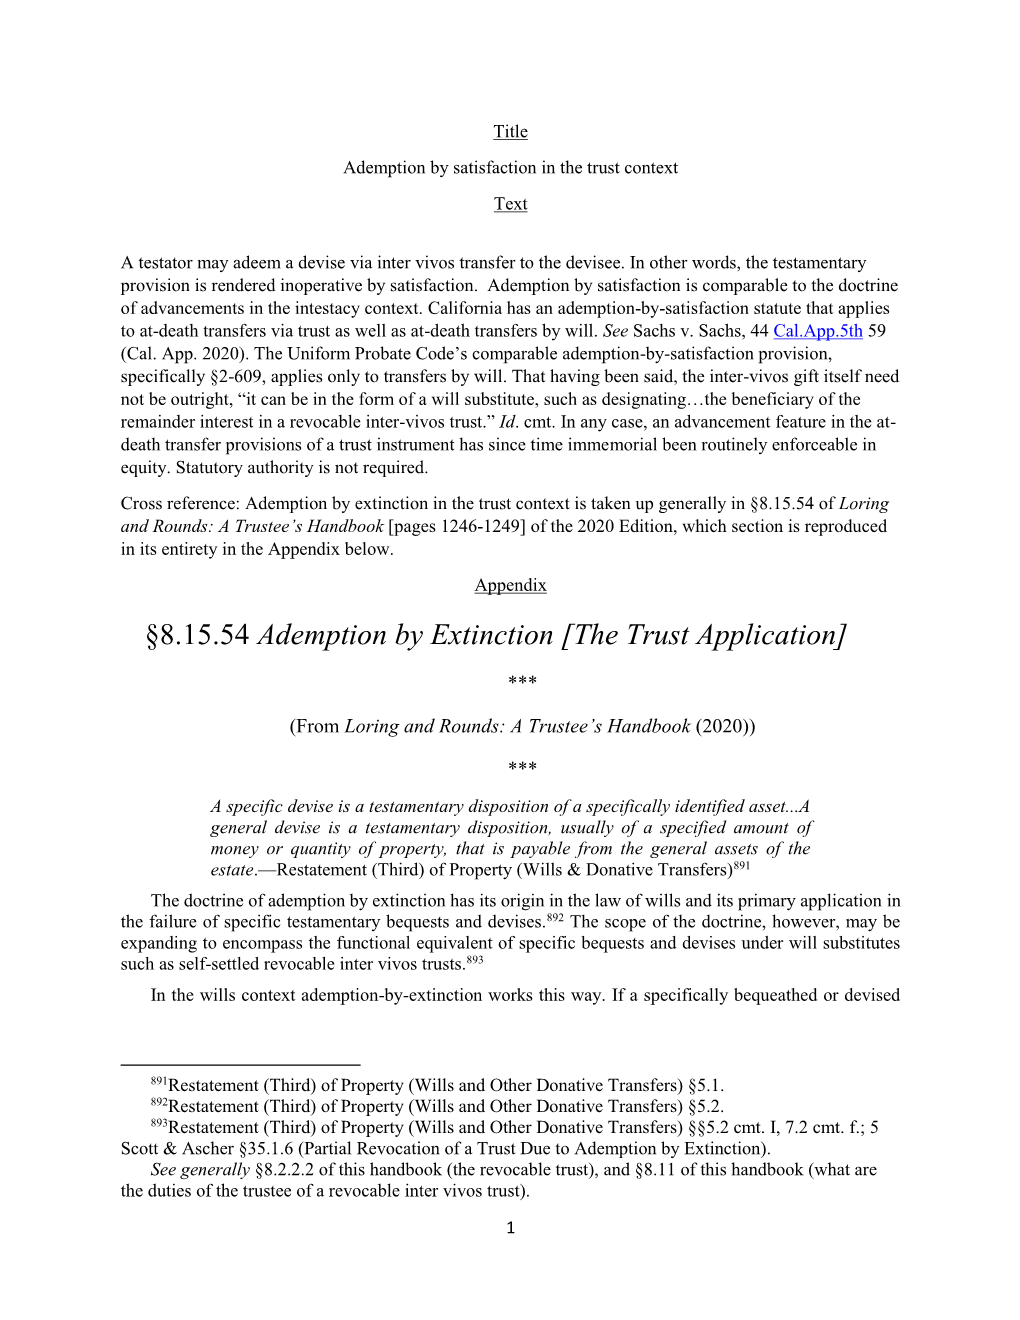 §8.15.54 Ademption by Extinction [The Trust Application]